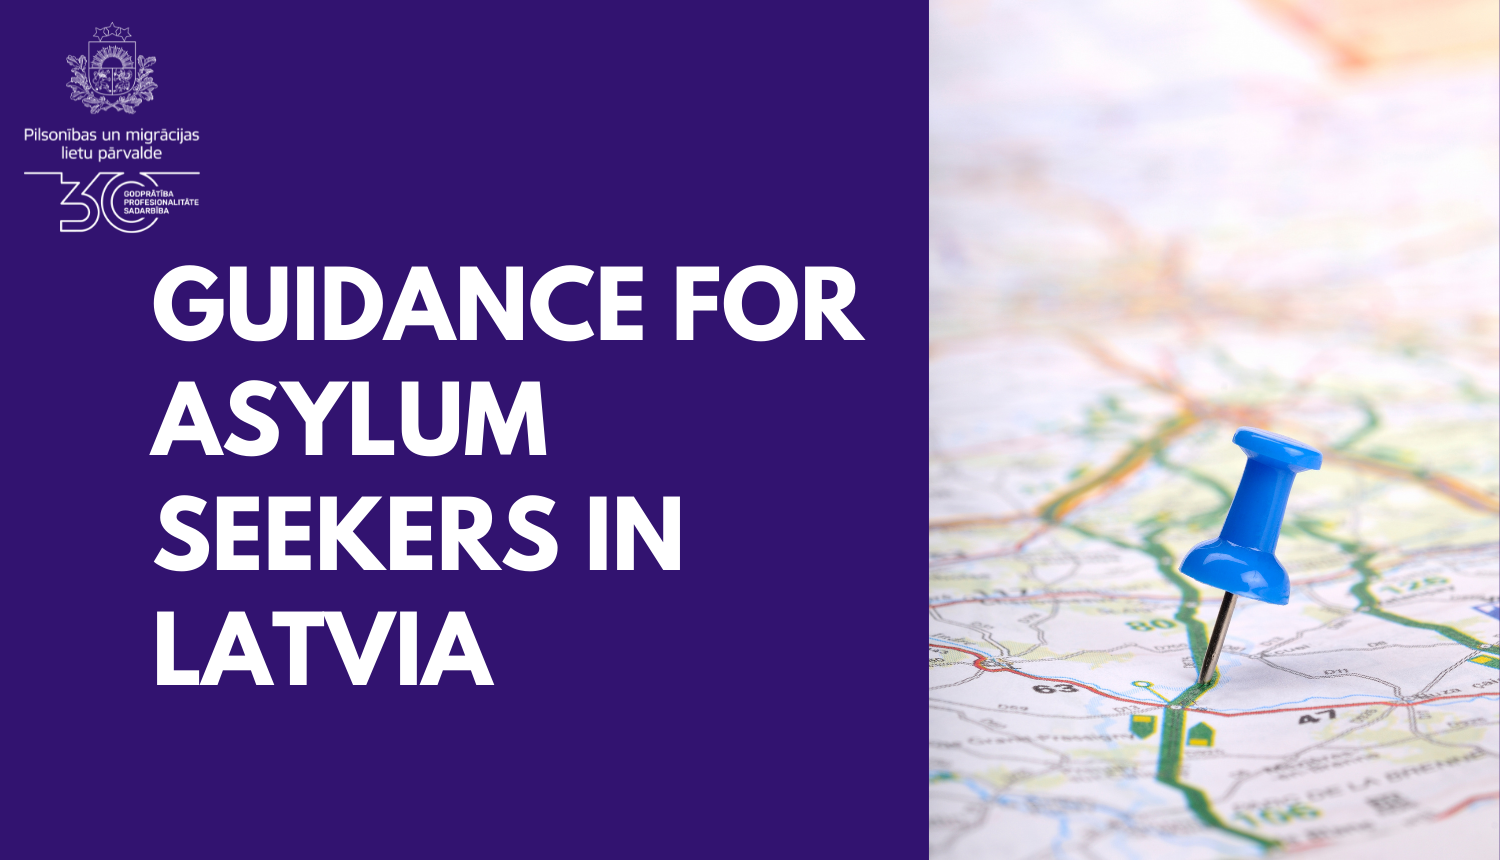 Guidance for asylum seekers in Latvia